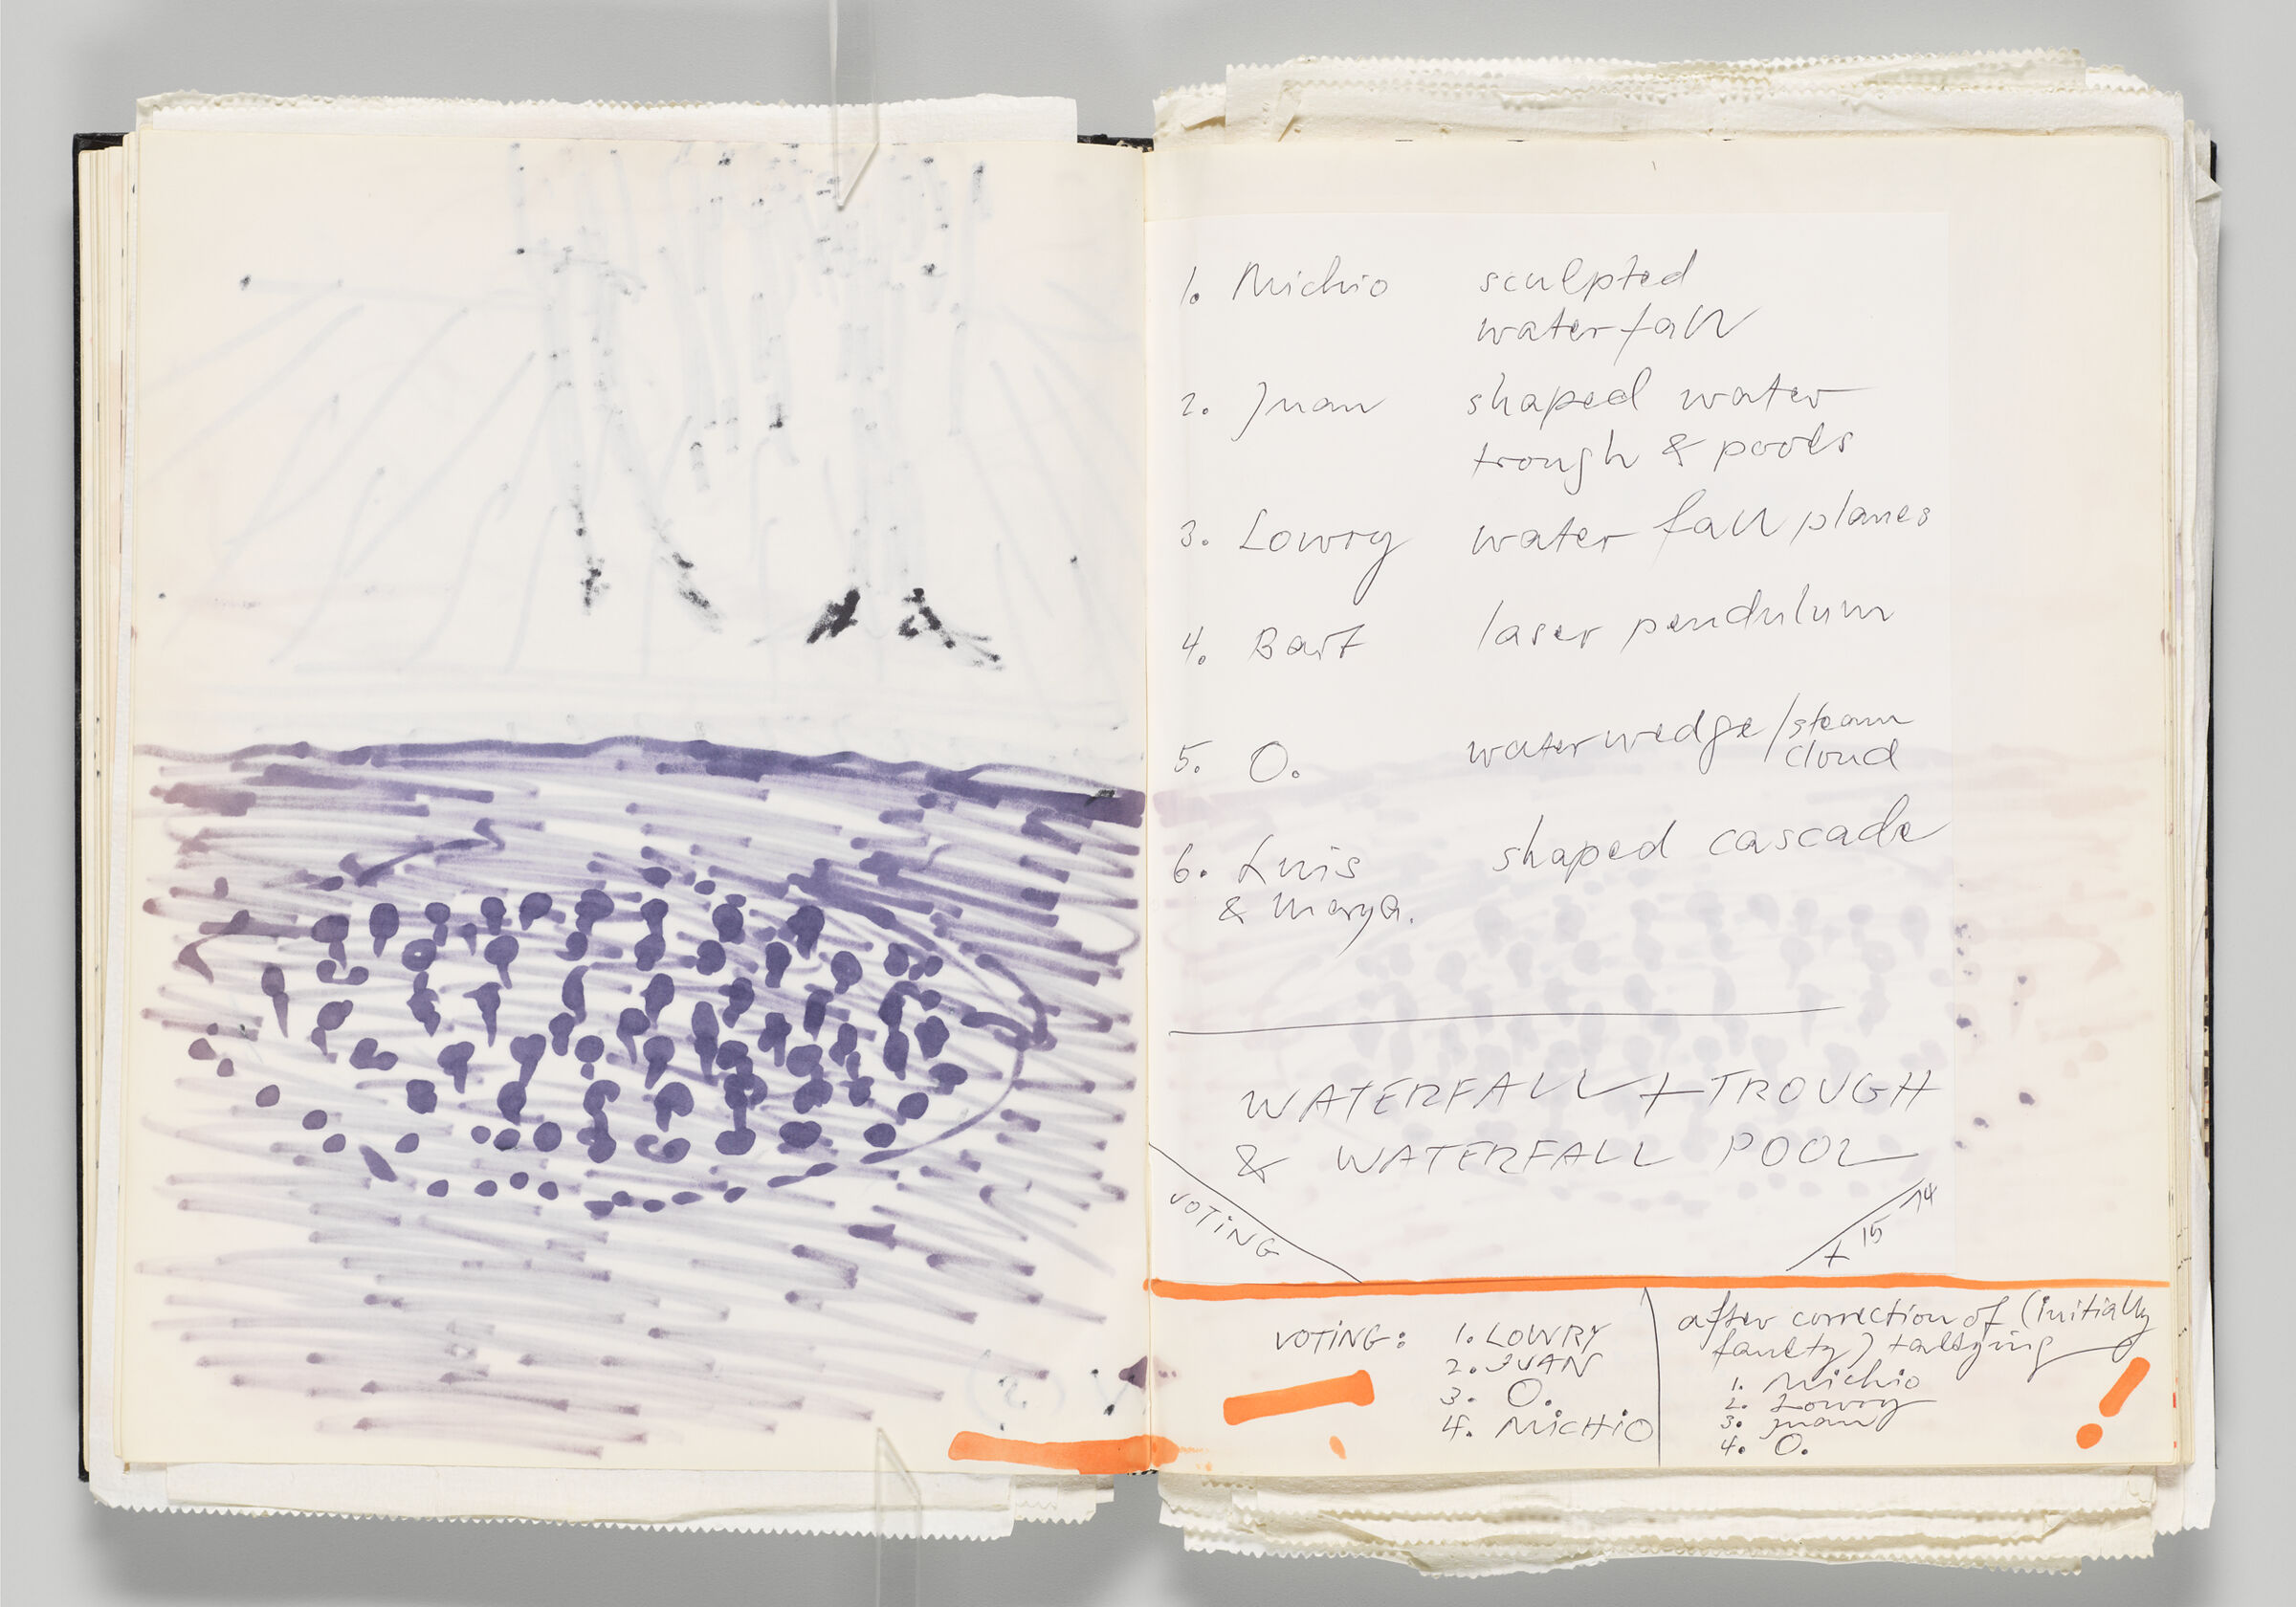 Untitled (Bleed-Through Of Previous Page And Color Transfer, Left Page); Untitled (Adhered Notes And Color Transfer, Right Page)